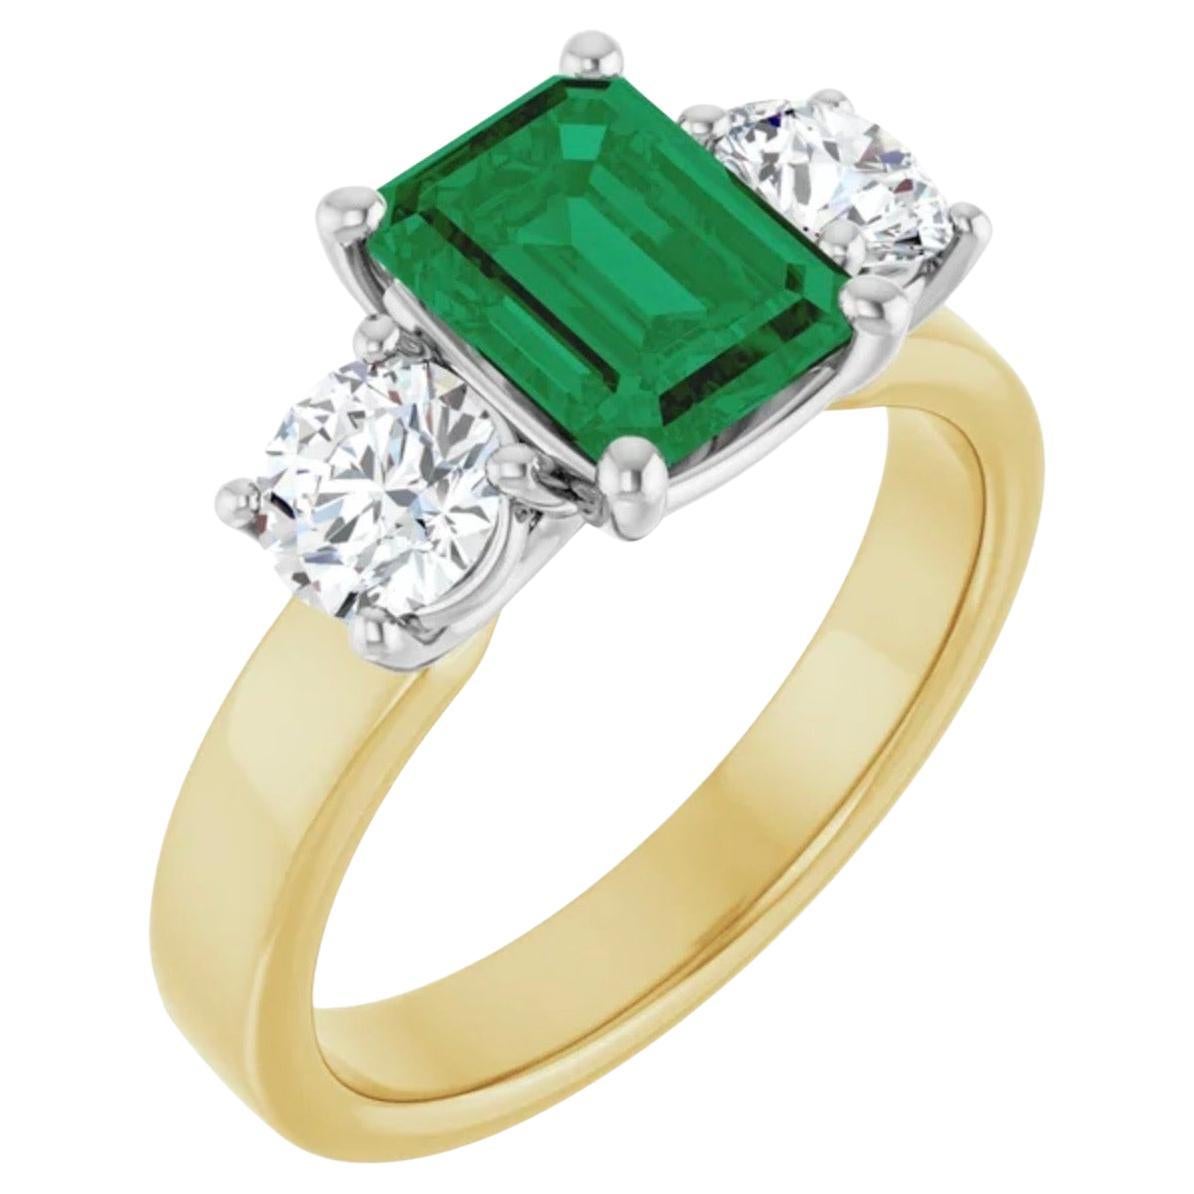 Emerald Cut 2.00 Carats Emerald Diamond Engagement Ring 18K White/Yellow  For Sale